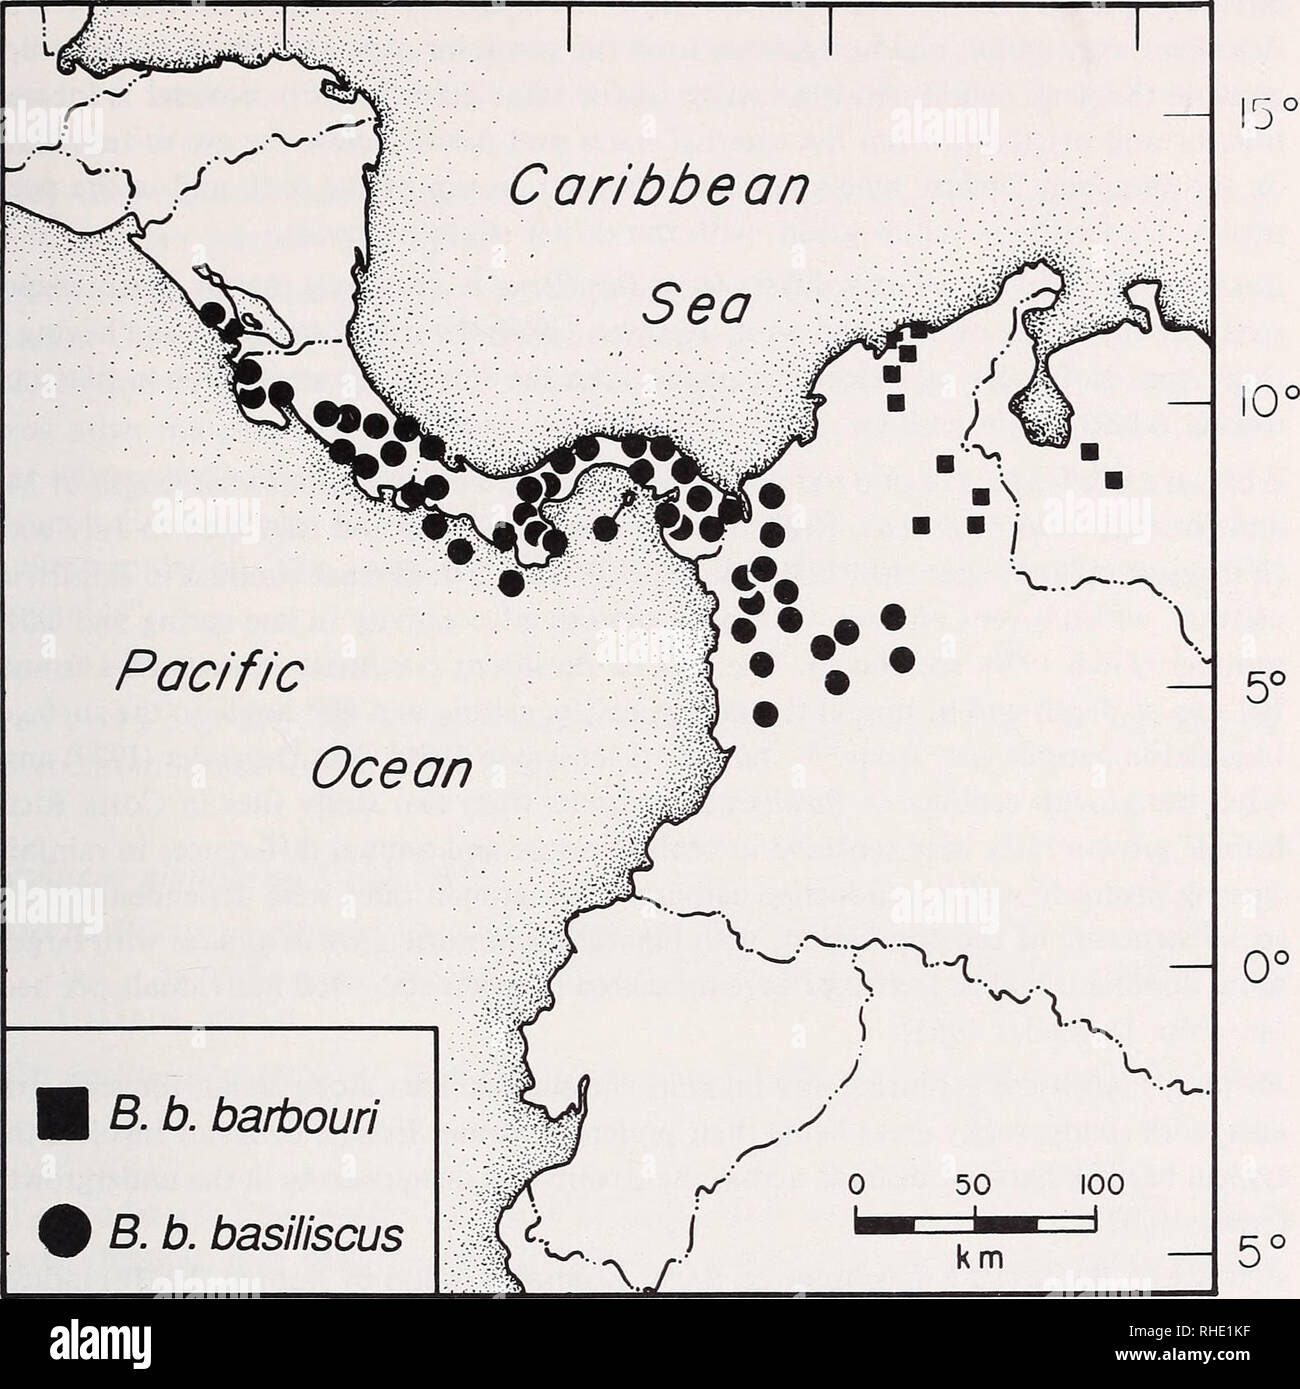 . Bonner zoologische Monographien. Zoology. 127 85° 80° 75° 70°. Fig. 47: Distribution of Basiliscus b. basiliscus and B. b. barbouri. Symbols represent localities of examined specimens. being shorter than the posterior ones. The greatest height is approximately the same size as the body. Seventeen or eighteen neural spines support the dorsal crest. The cau- dal crest is supported by 23 neural spines and originates in the sacral region just poste- rior to the dorsal crest. The caudal crest is short at first and becomes longer towards the middle of the tail to become shorter again. The two cres Stock Photo